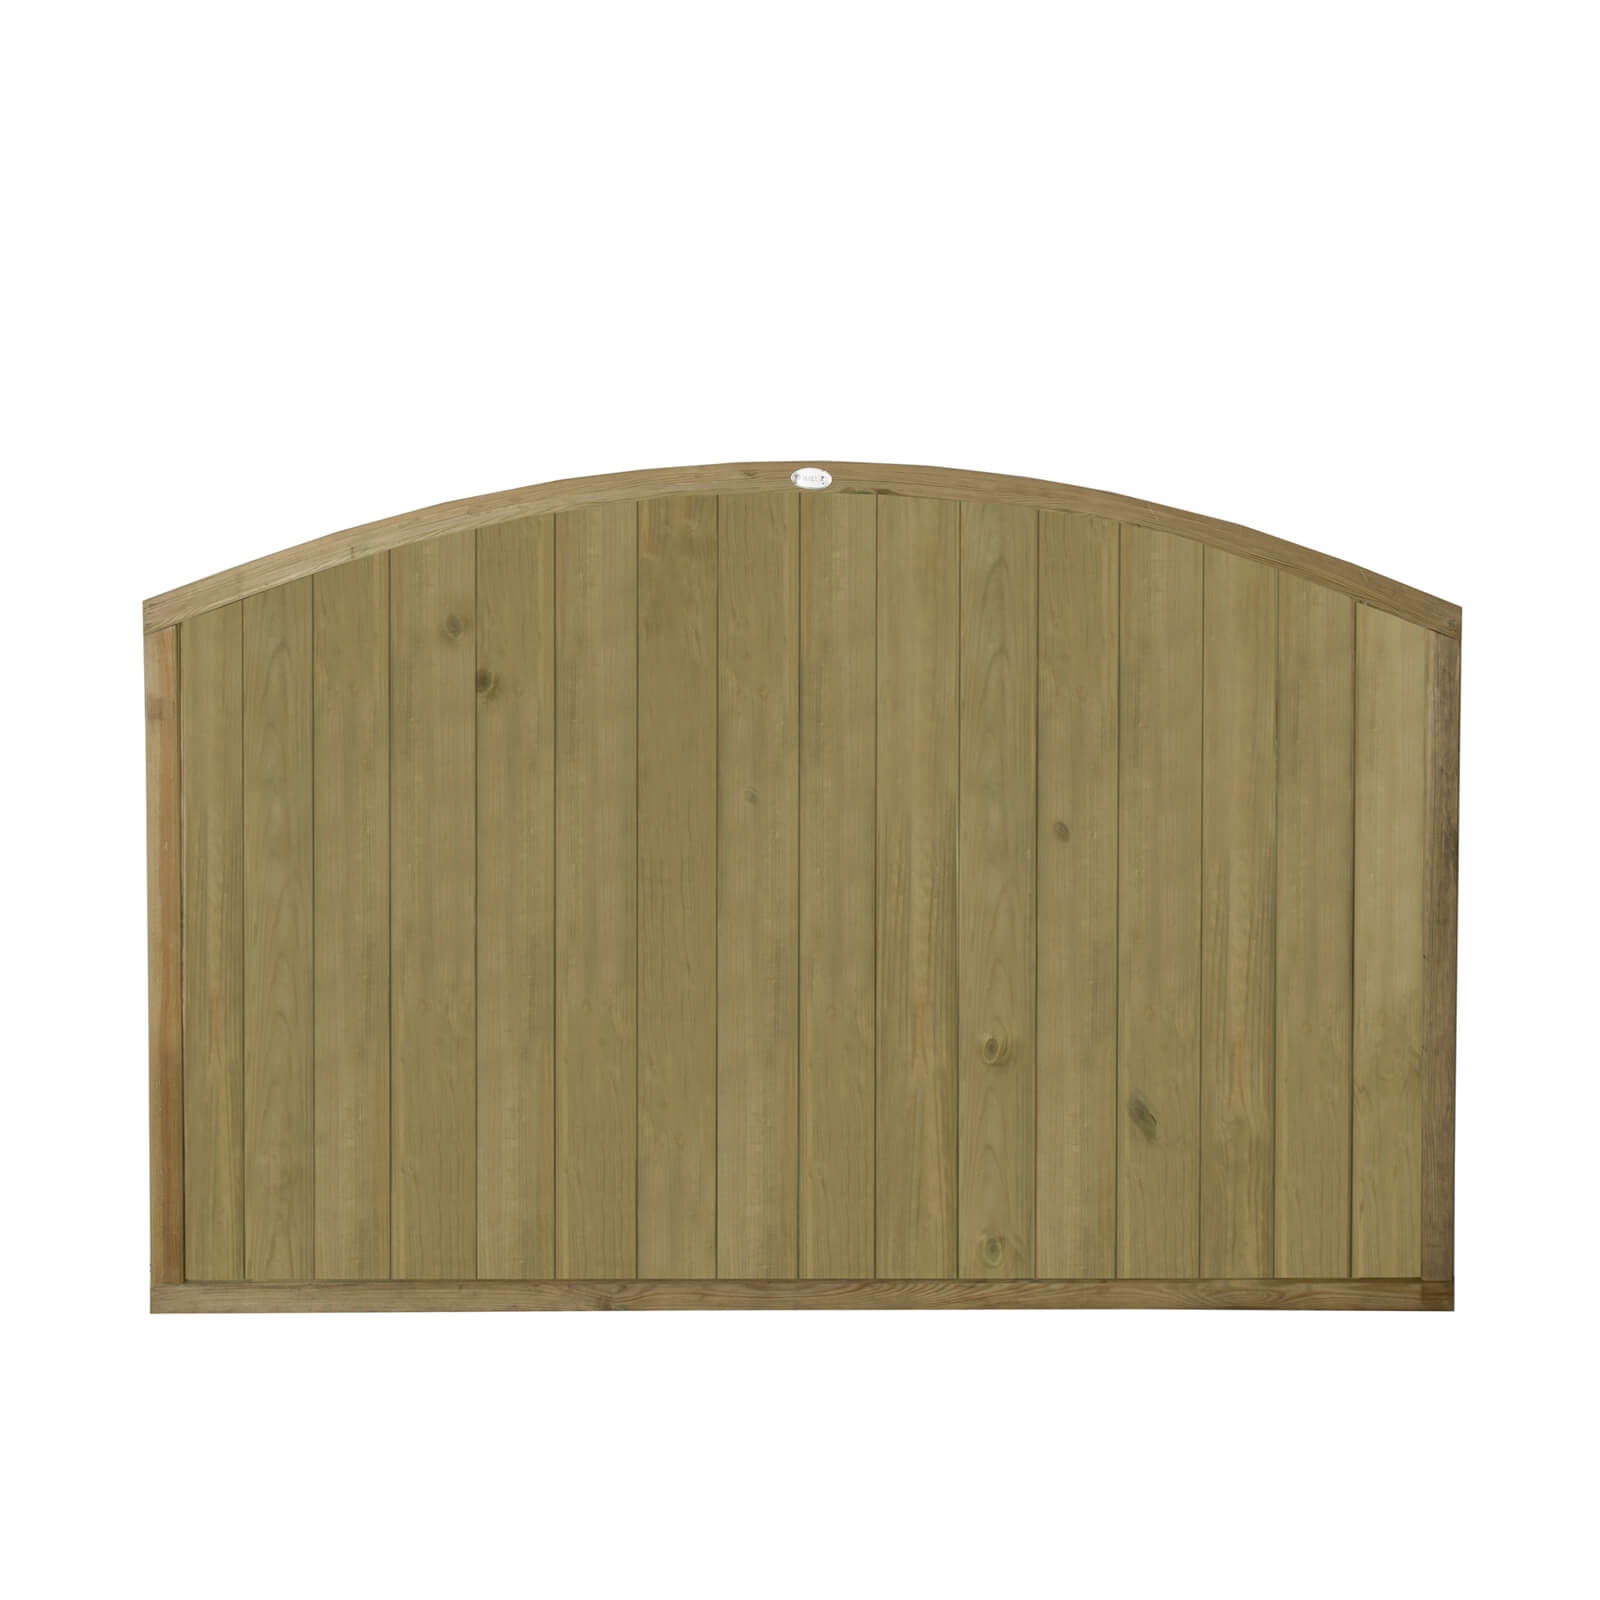 Forest Dome Tongue and Groove Panel - 4ft - Pack of 4